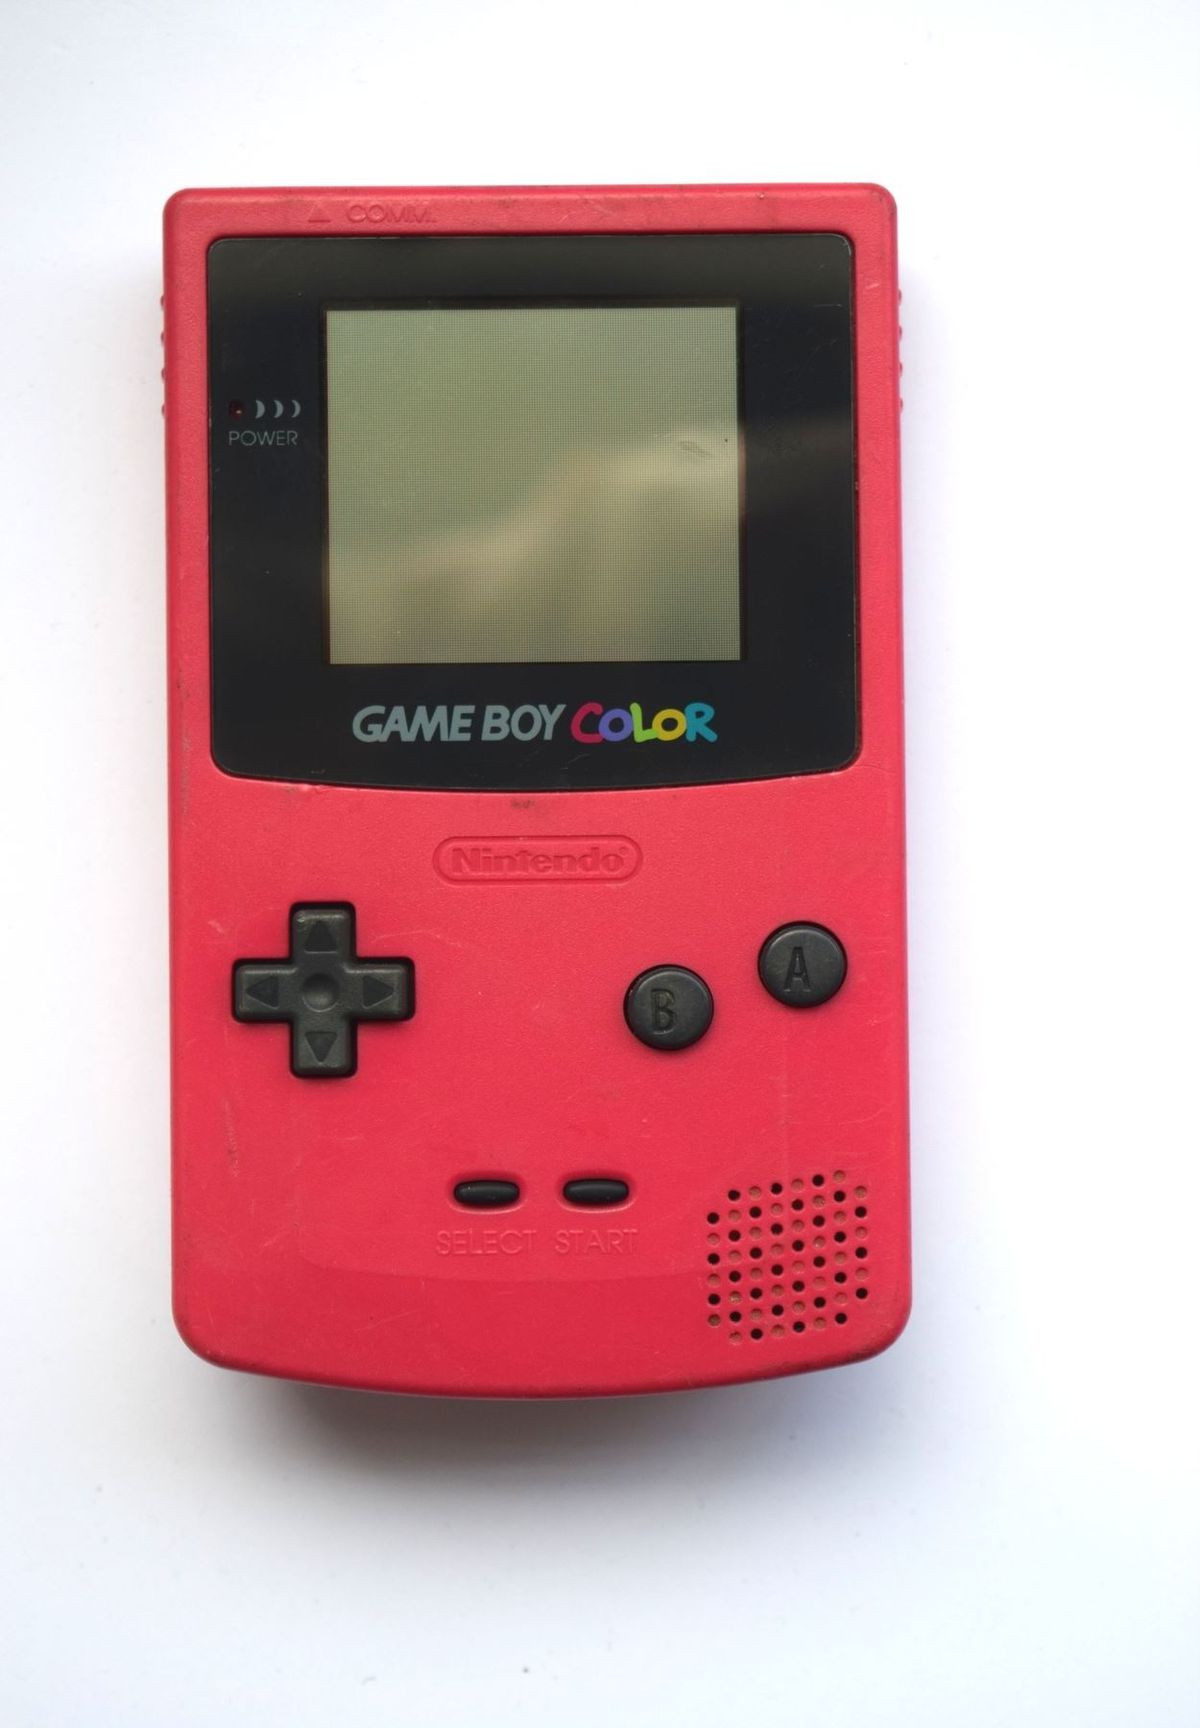 The Berry-colored Game Boy Color.